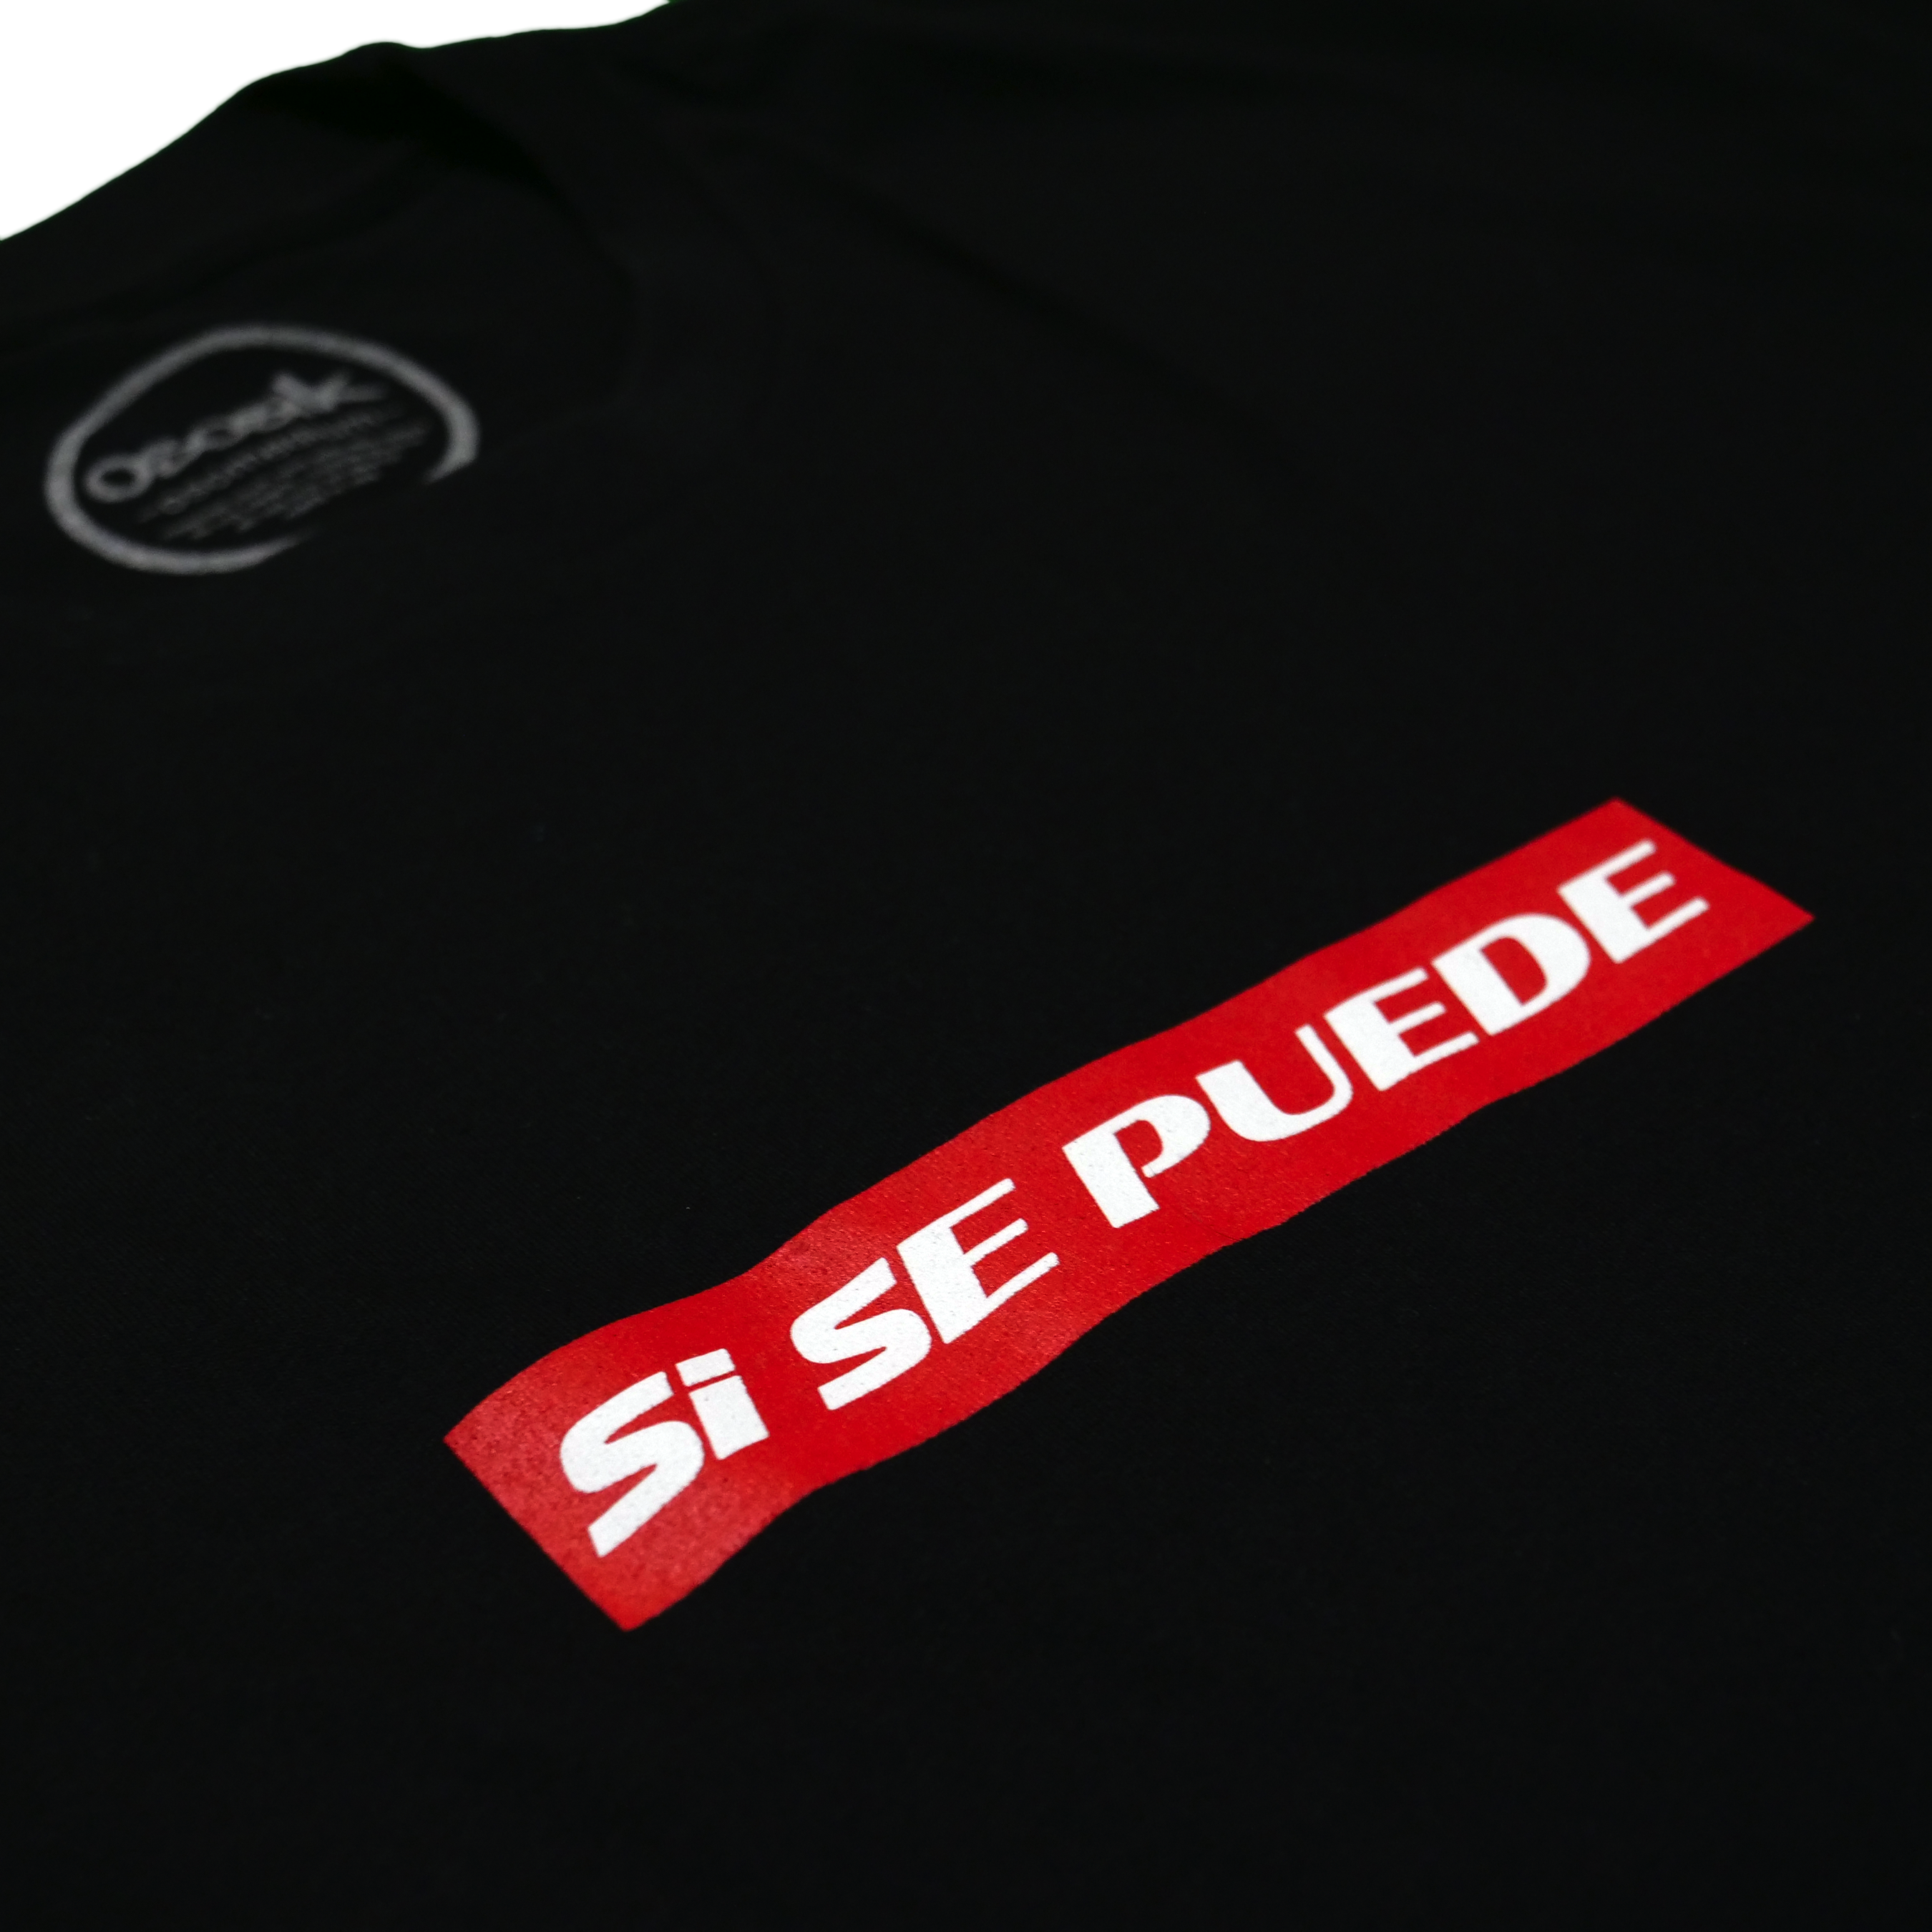 Si se puede with red border graphic tee